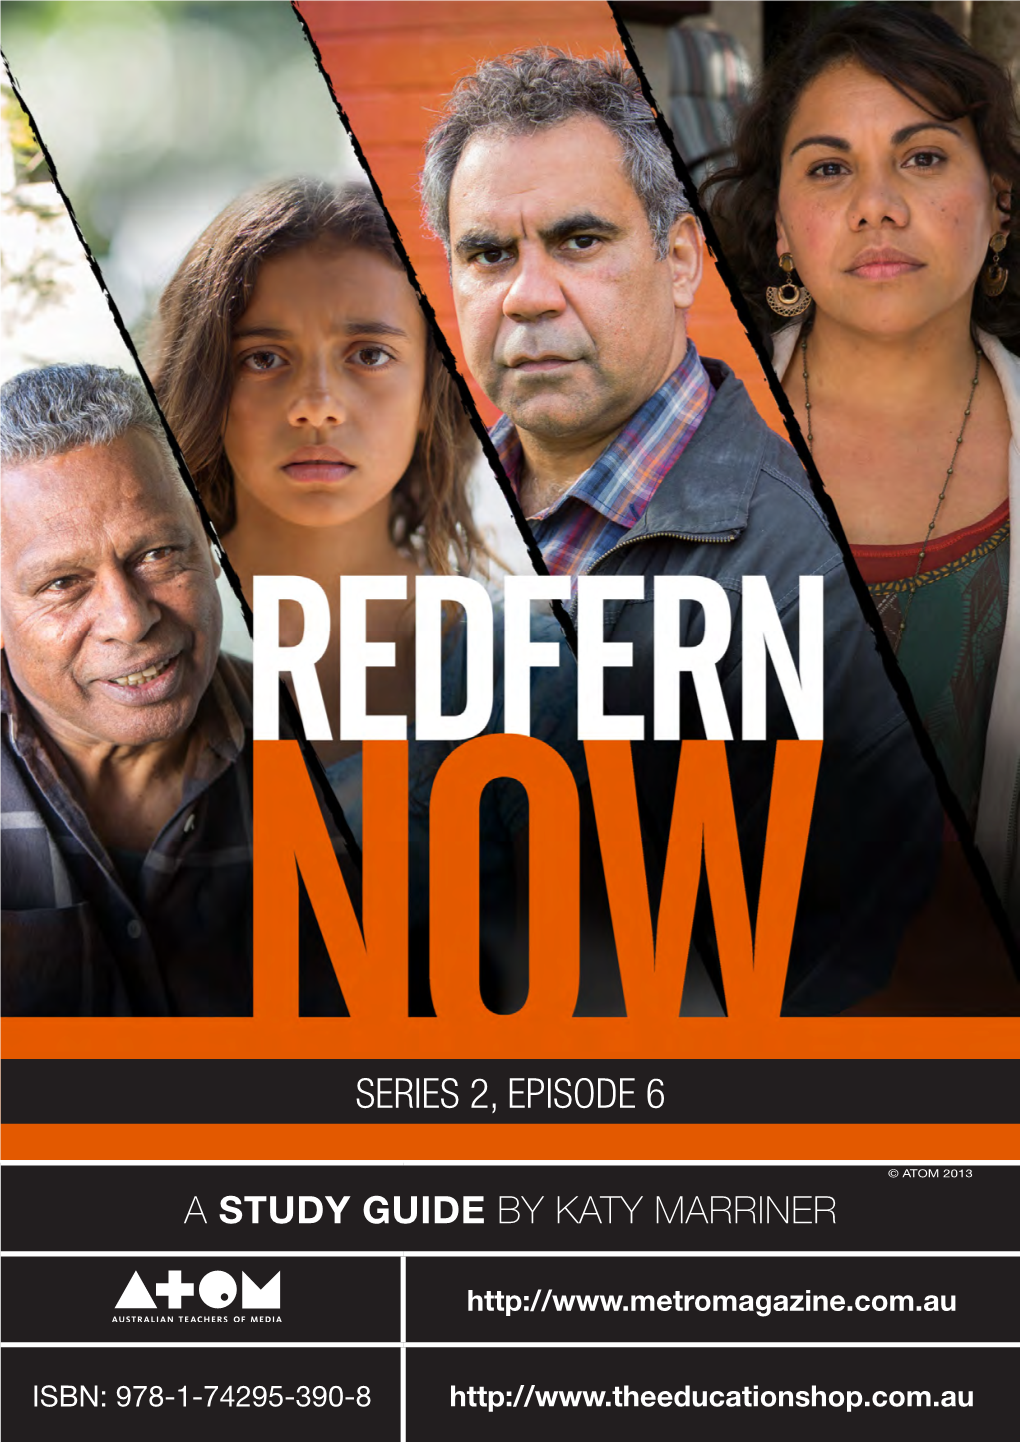 Redfern Now Series 2 Portrays Contemporary Inner City Indigenous Life in and Around the Suburb of Redfern in Sydney, New South Wales